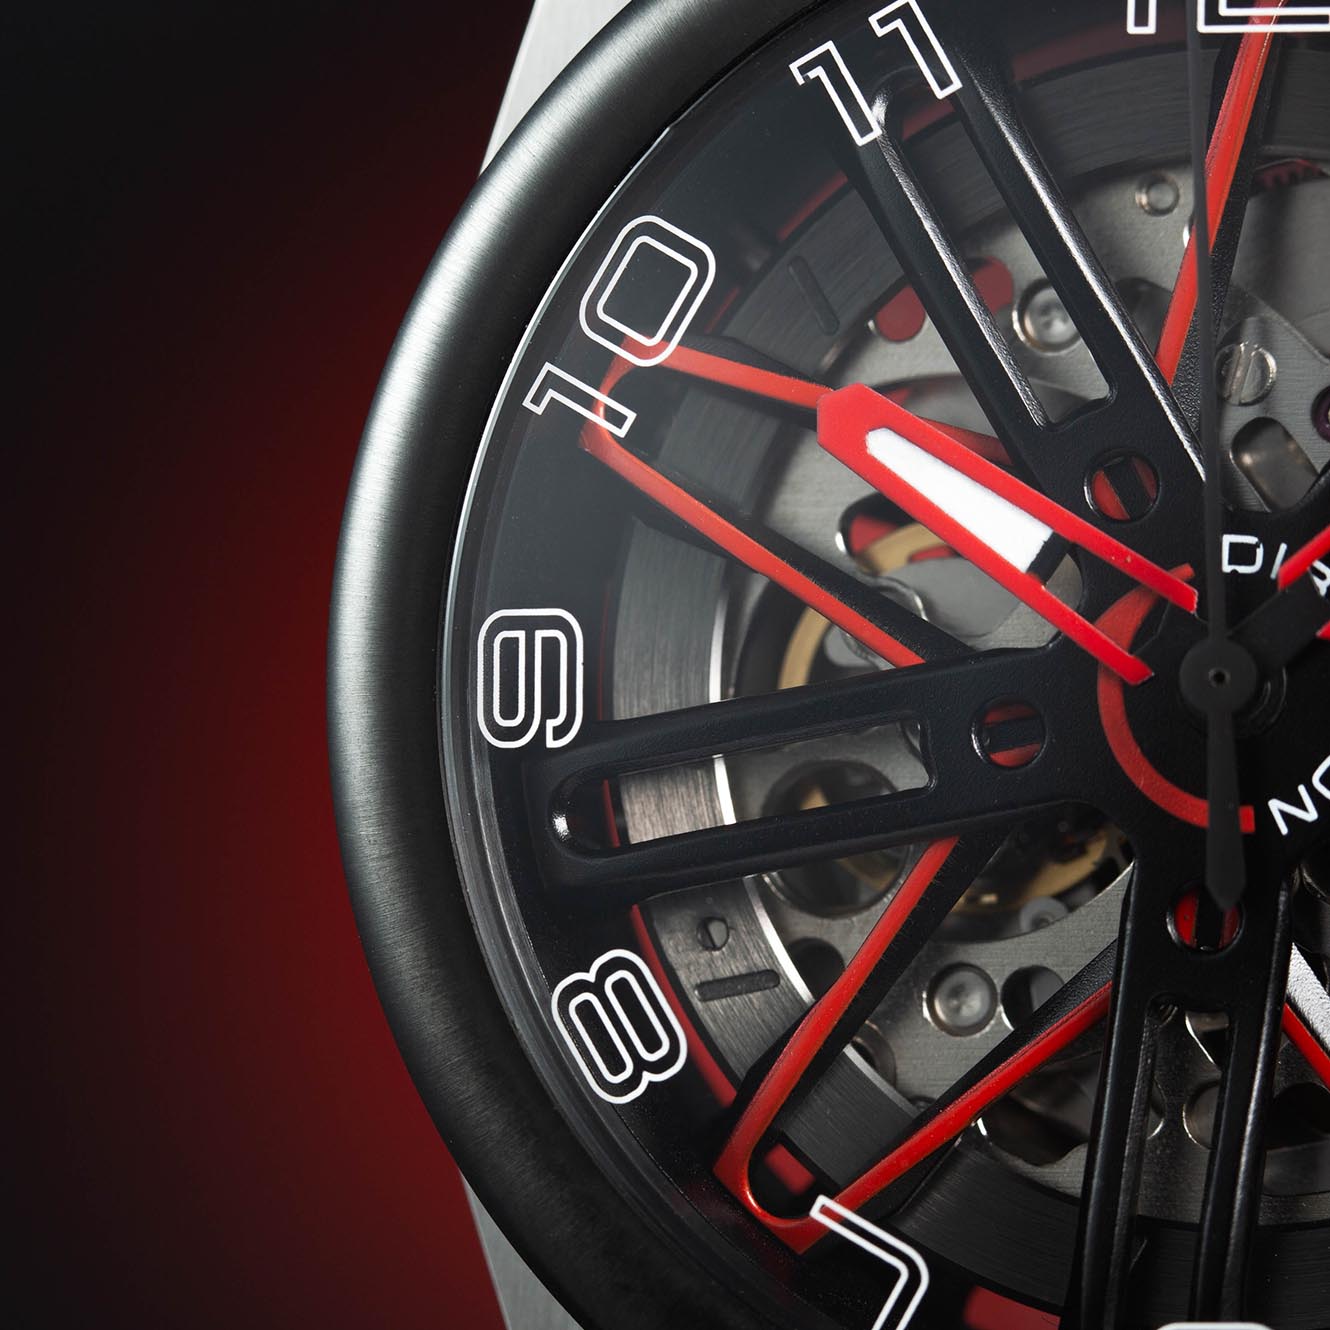 RIM GT Ø42mm in red | Mens Luxury Watches | Italian Designed Watches